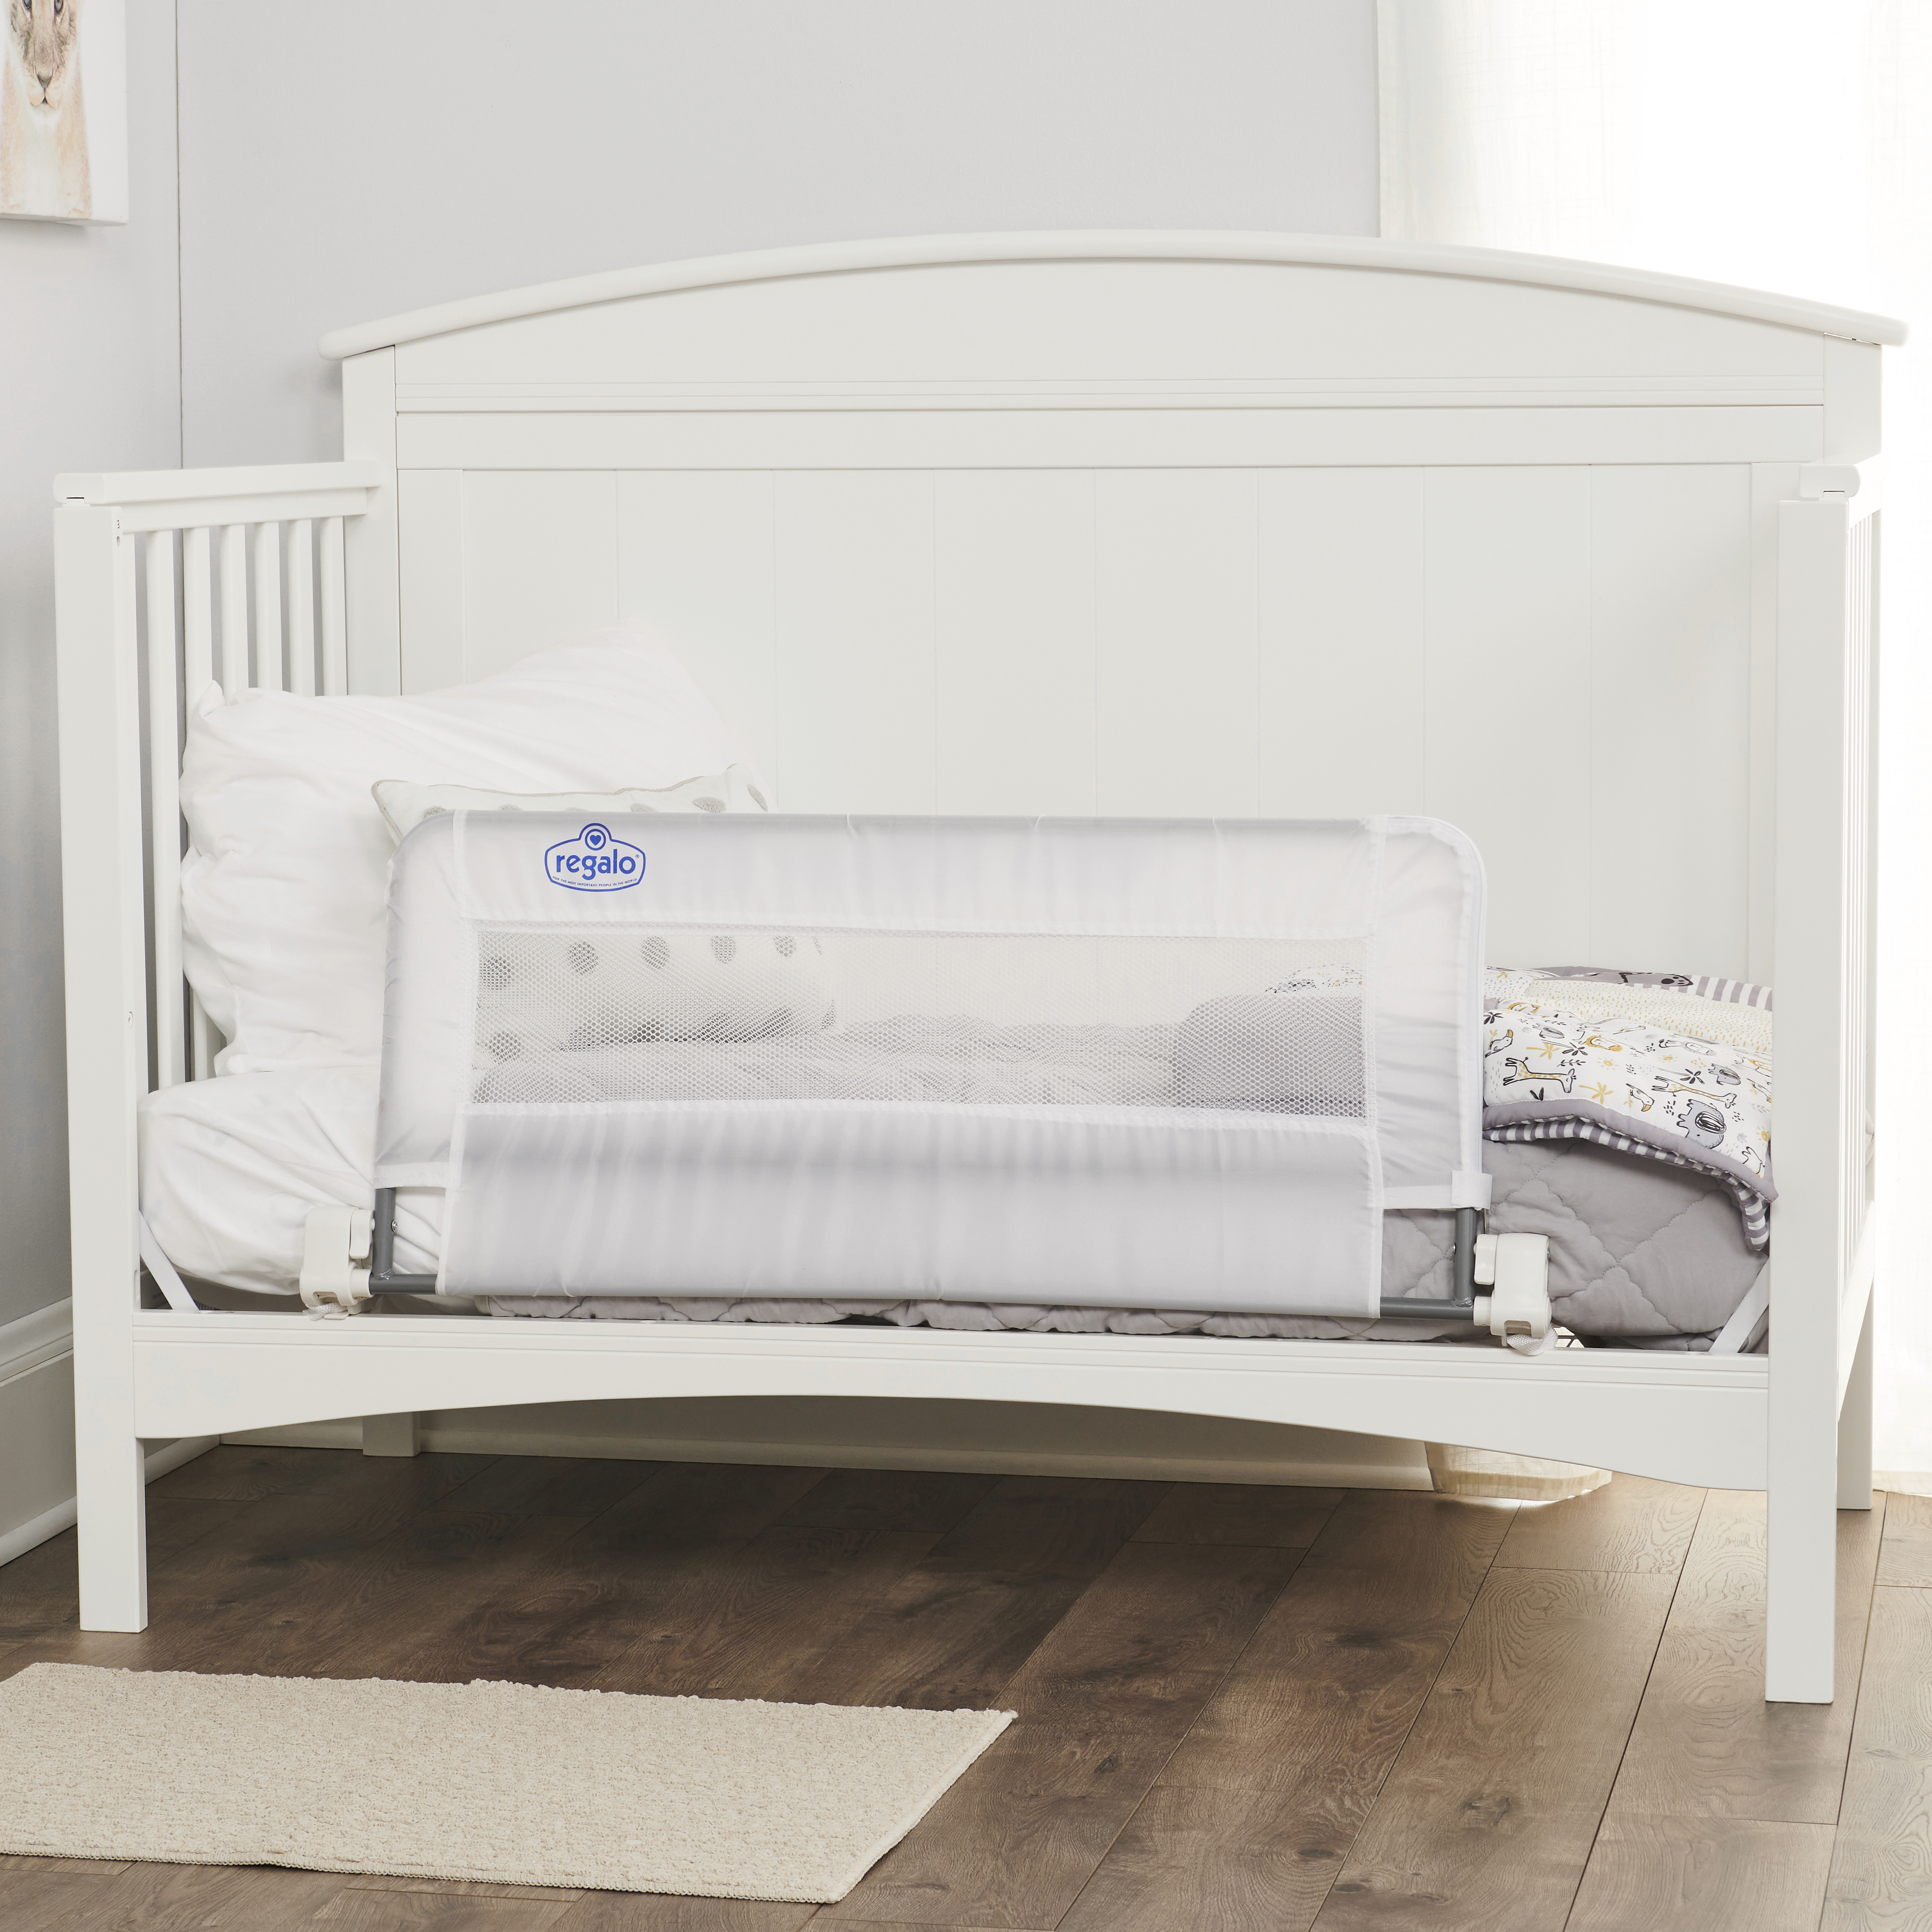 Regalo Swing Down Crib Rail, with Reinforced Anchor Safety System - image 1 of 3